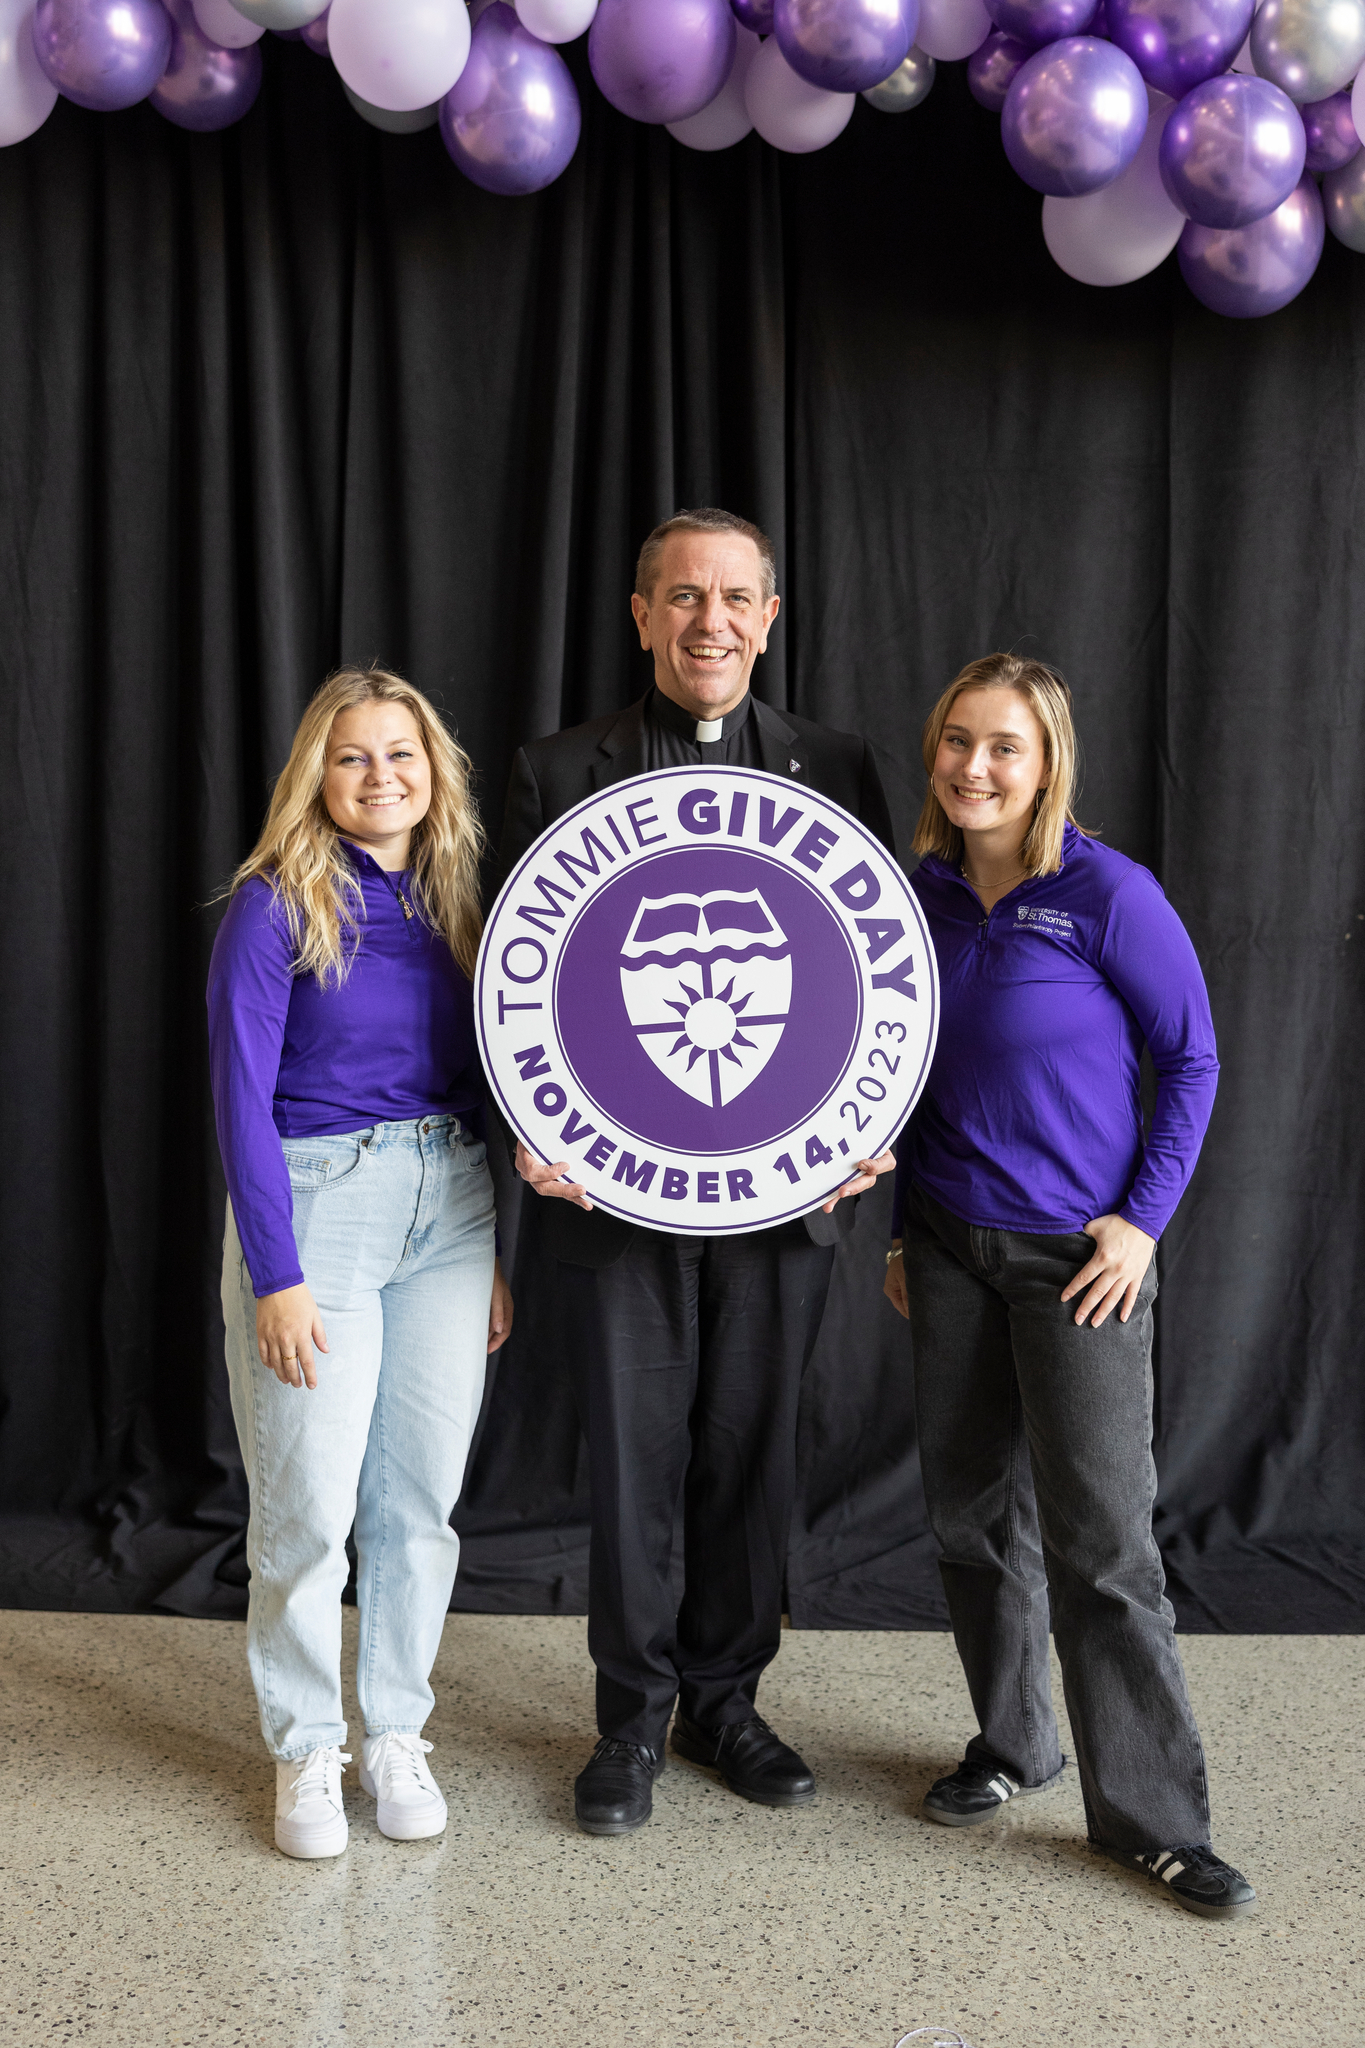 Tommie students and Father Chris Collins holding a Tommie Give Day sign and smiling